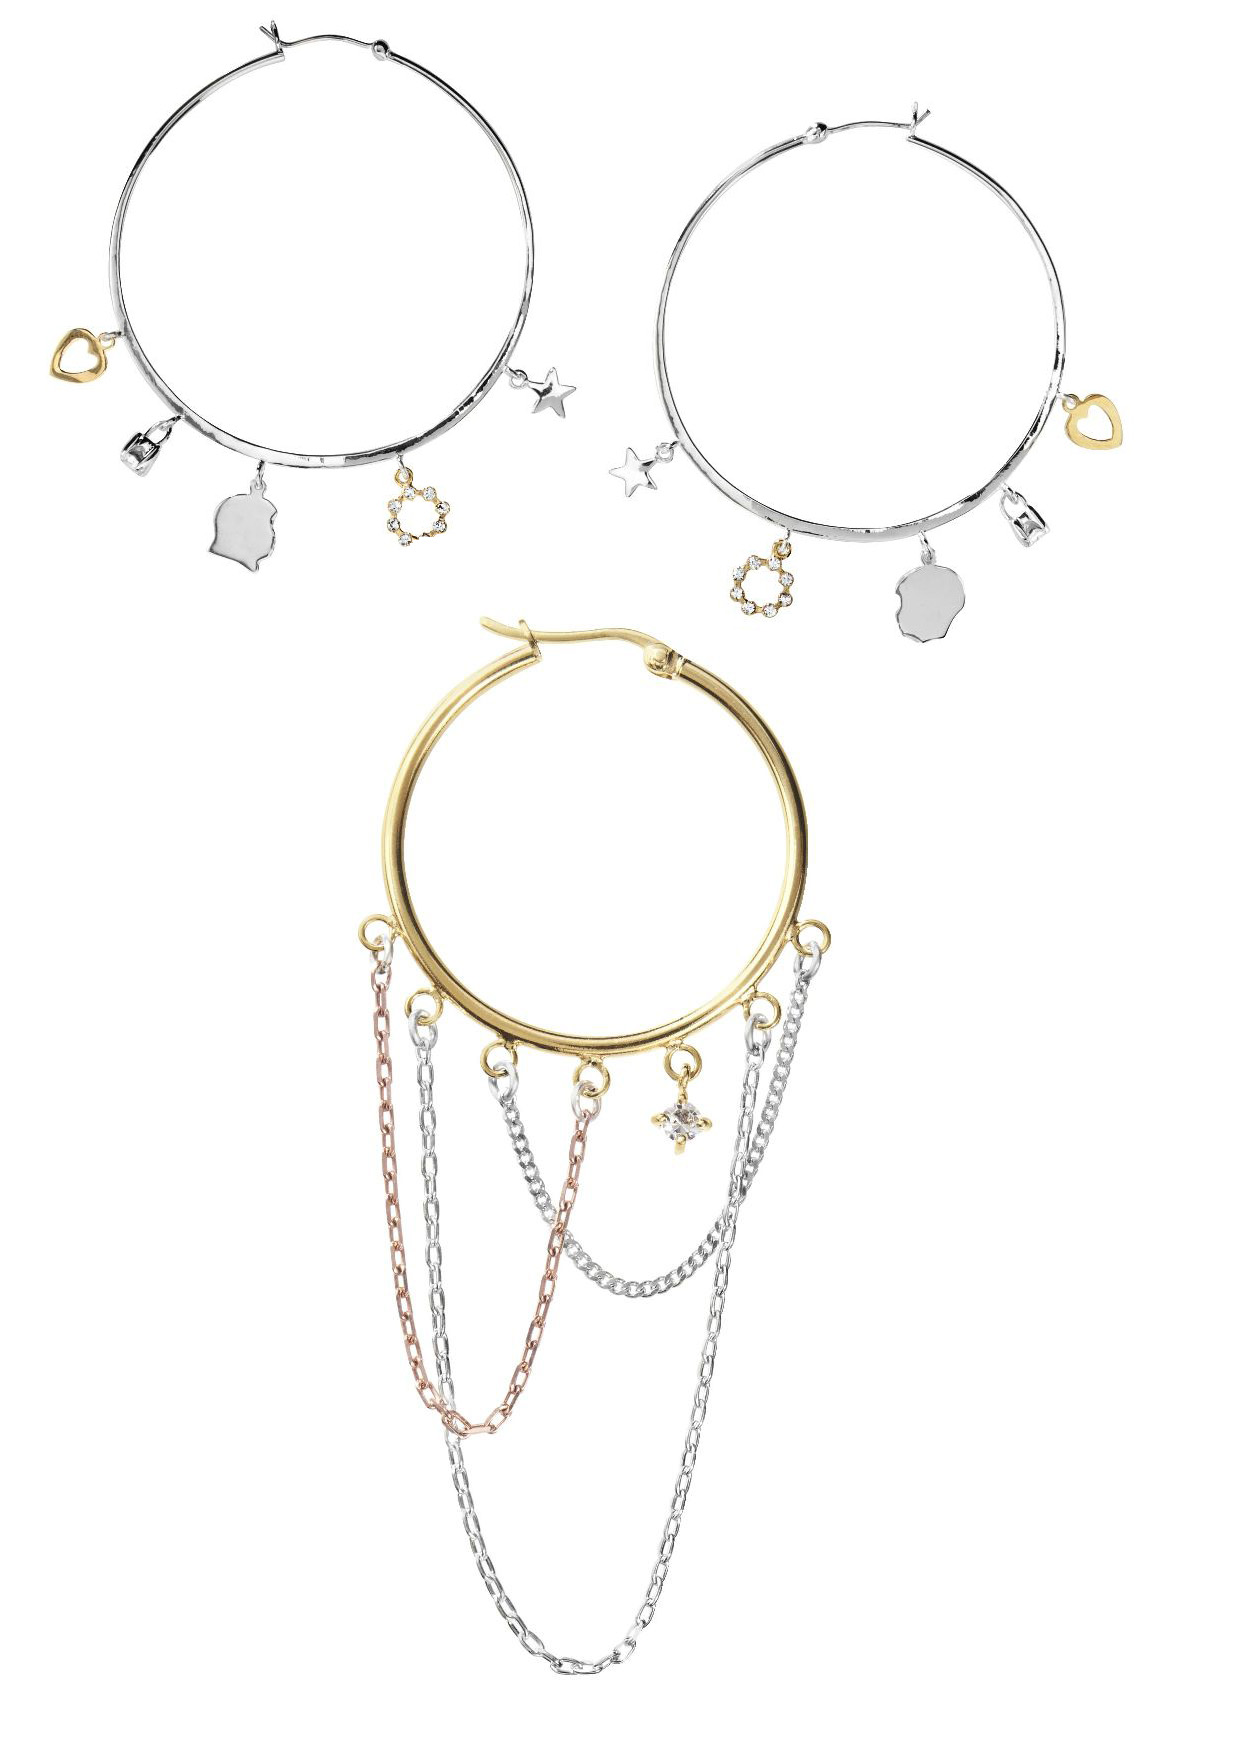 Anna Sheffield Collaborates with Target for Jewelry Collection